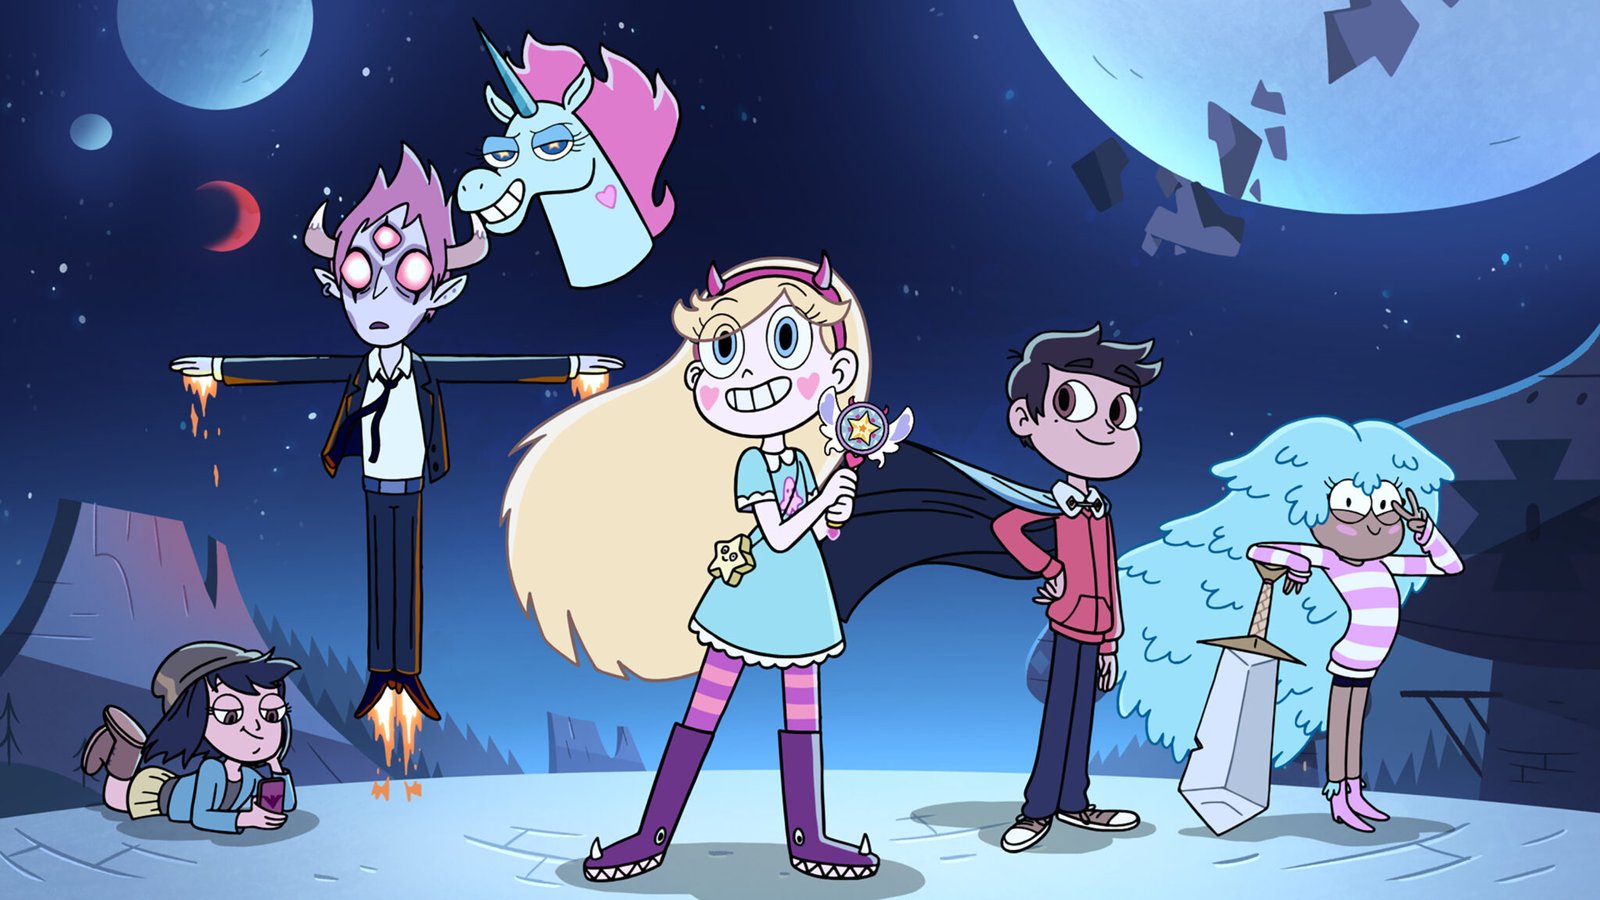 Star Vs The Forces Of Evil Season 5 Release Date ThePopTimes